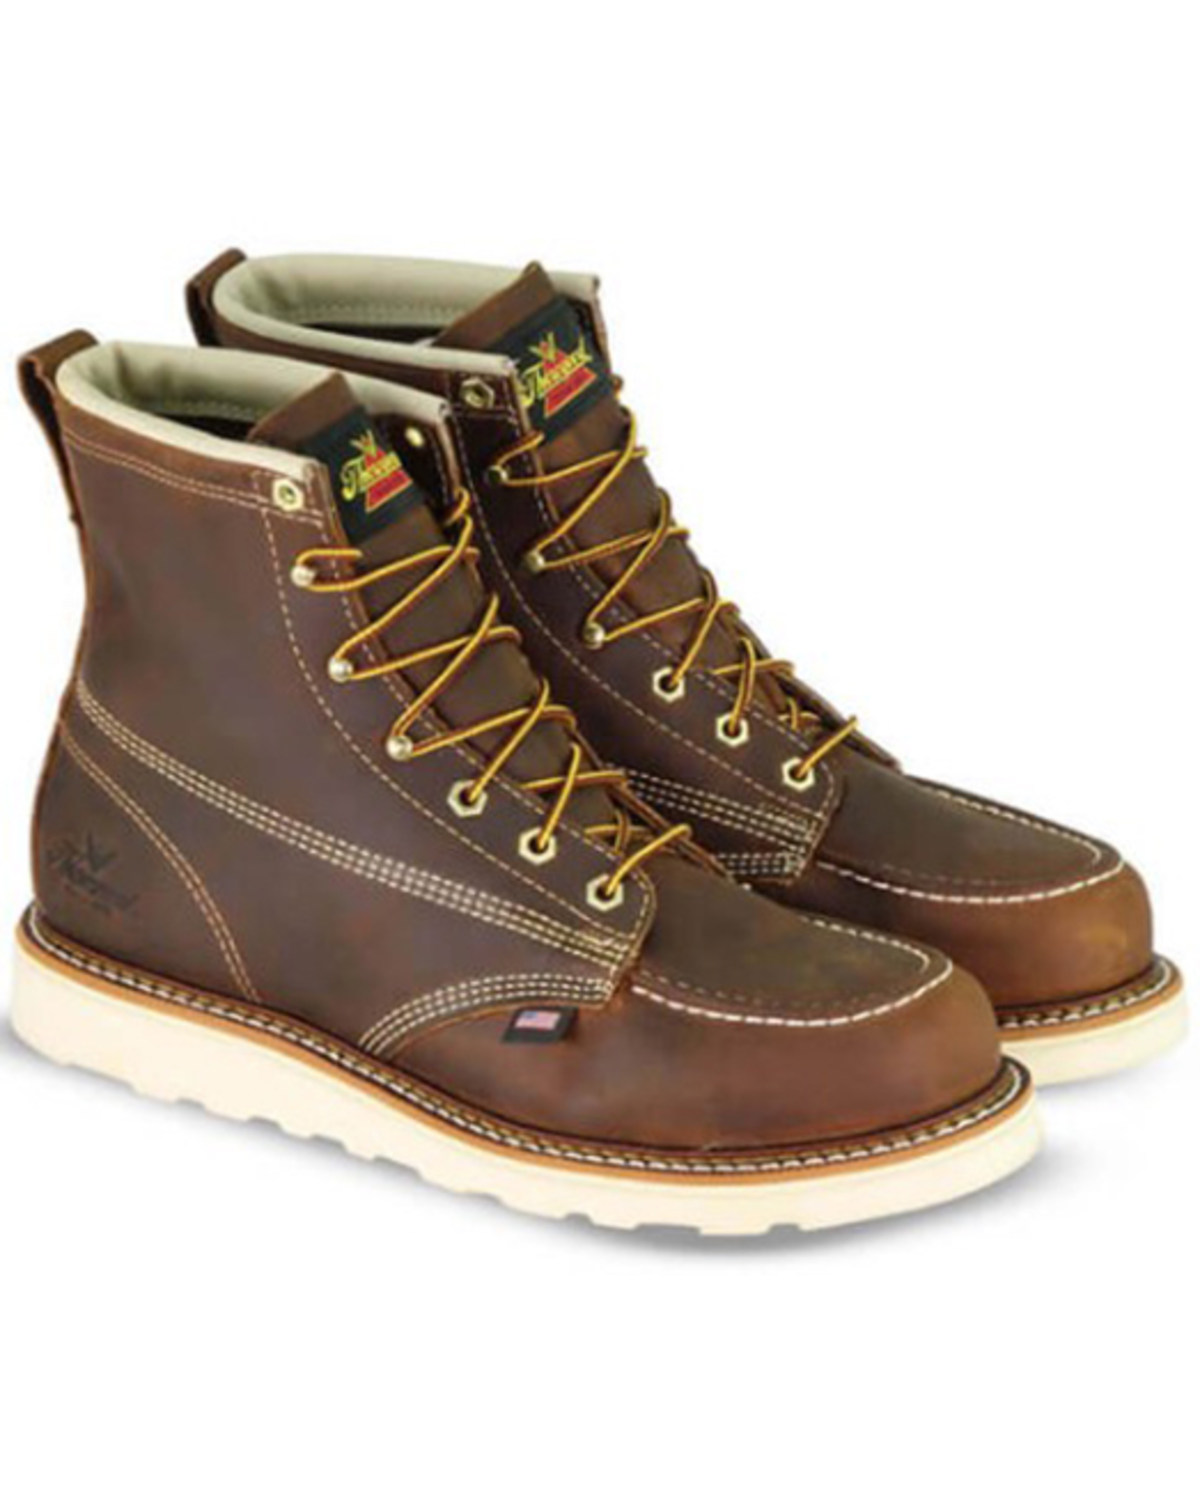 Thorogood Men's 6" Lace-Up Wedge Sole Work Boots - Steel Toe